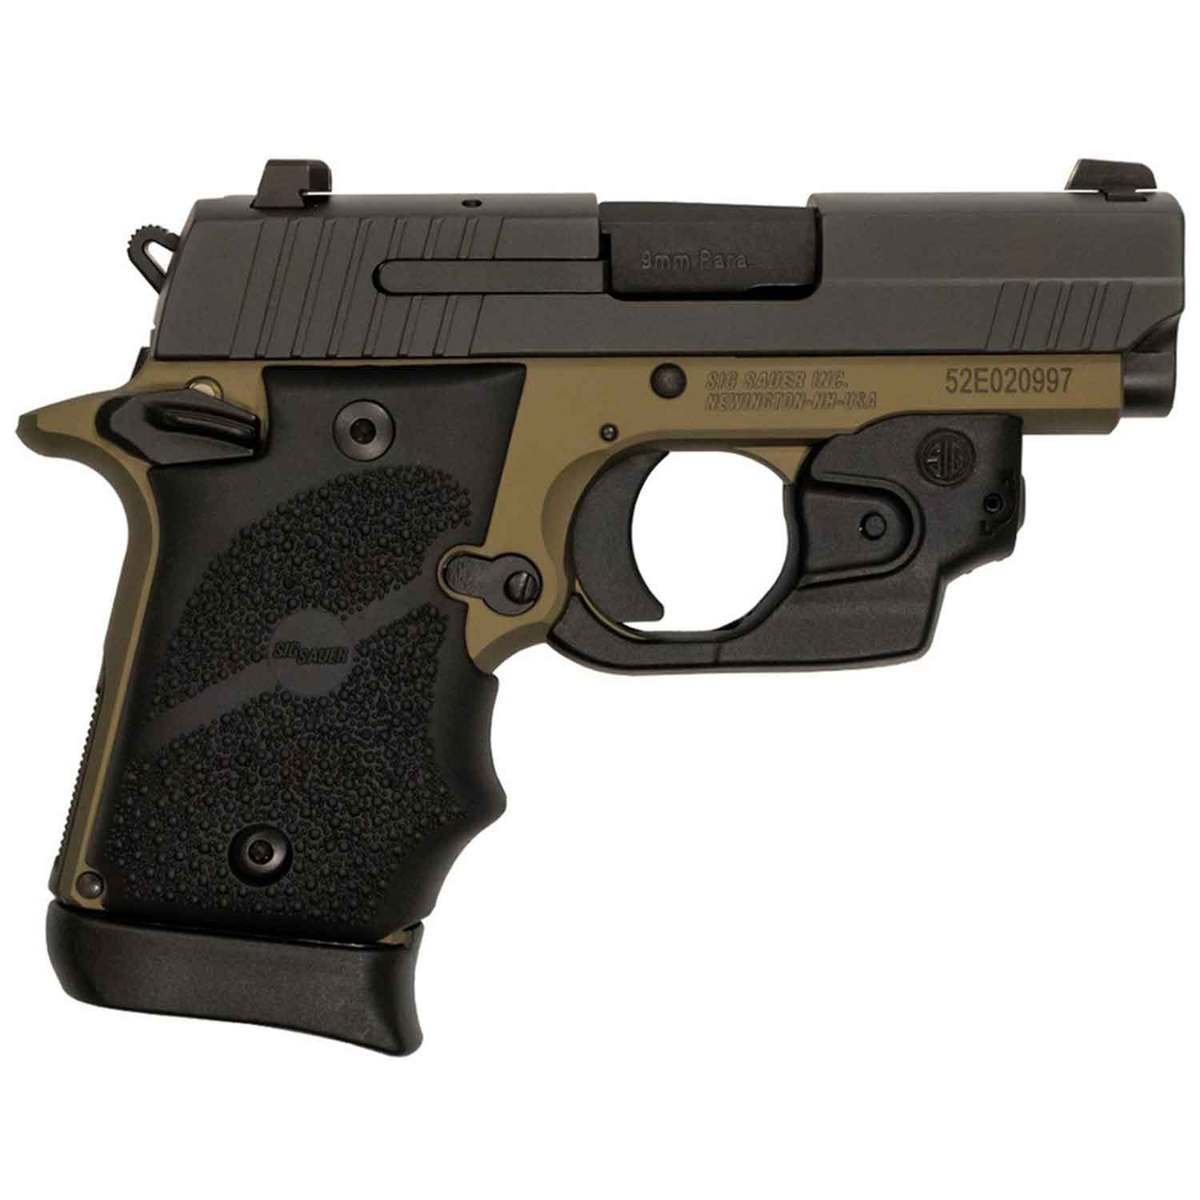 sig sauer p938 with lima 38 laser module 9mm luger 3in fdeblack pistol 71 rounds 1638525 1